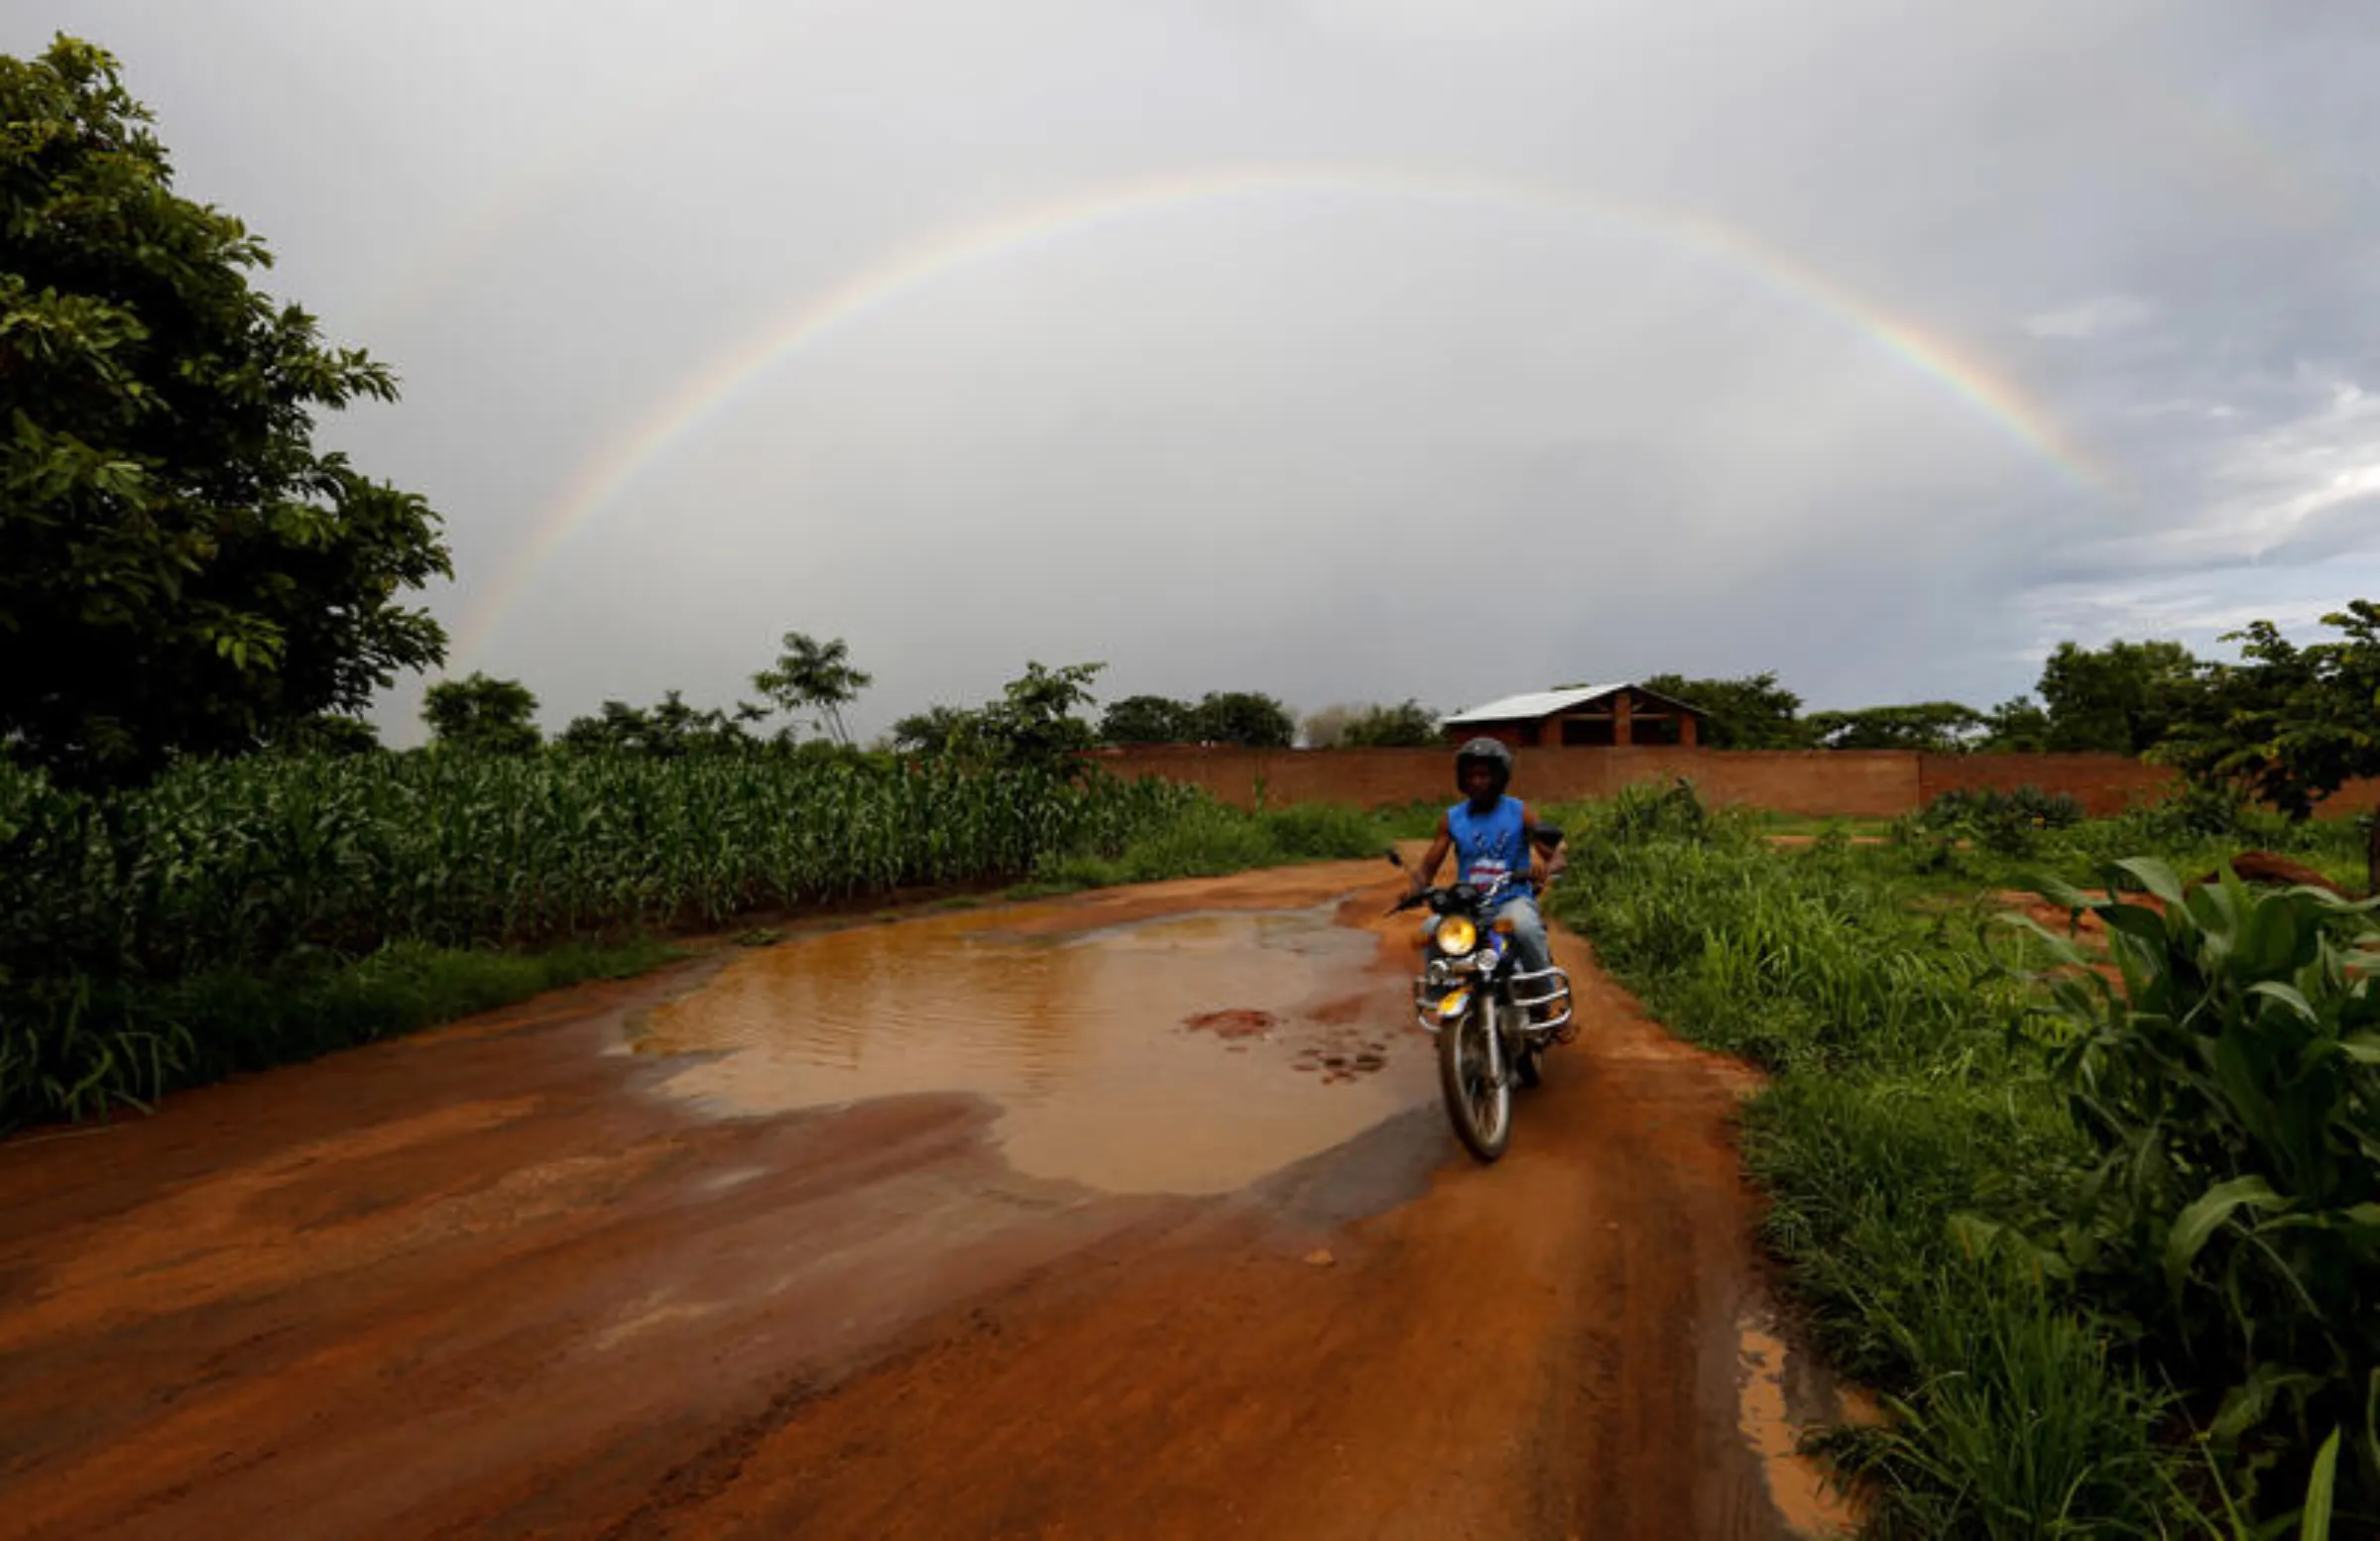 Storm clouds hang over a rainbow as a motorcyclist rides past a field of maize after late rains near Malawi's capital Lilongwe, February 1, 2016. REUTERS/Mike Hutchings/File Photo